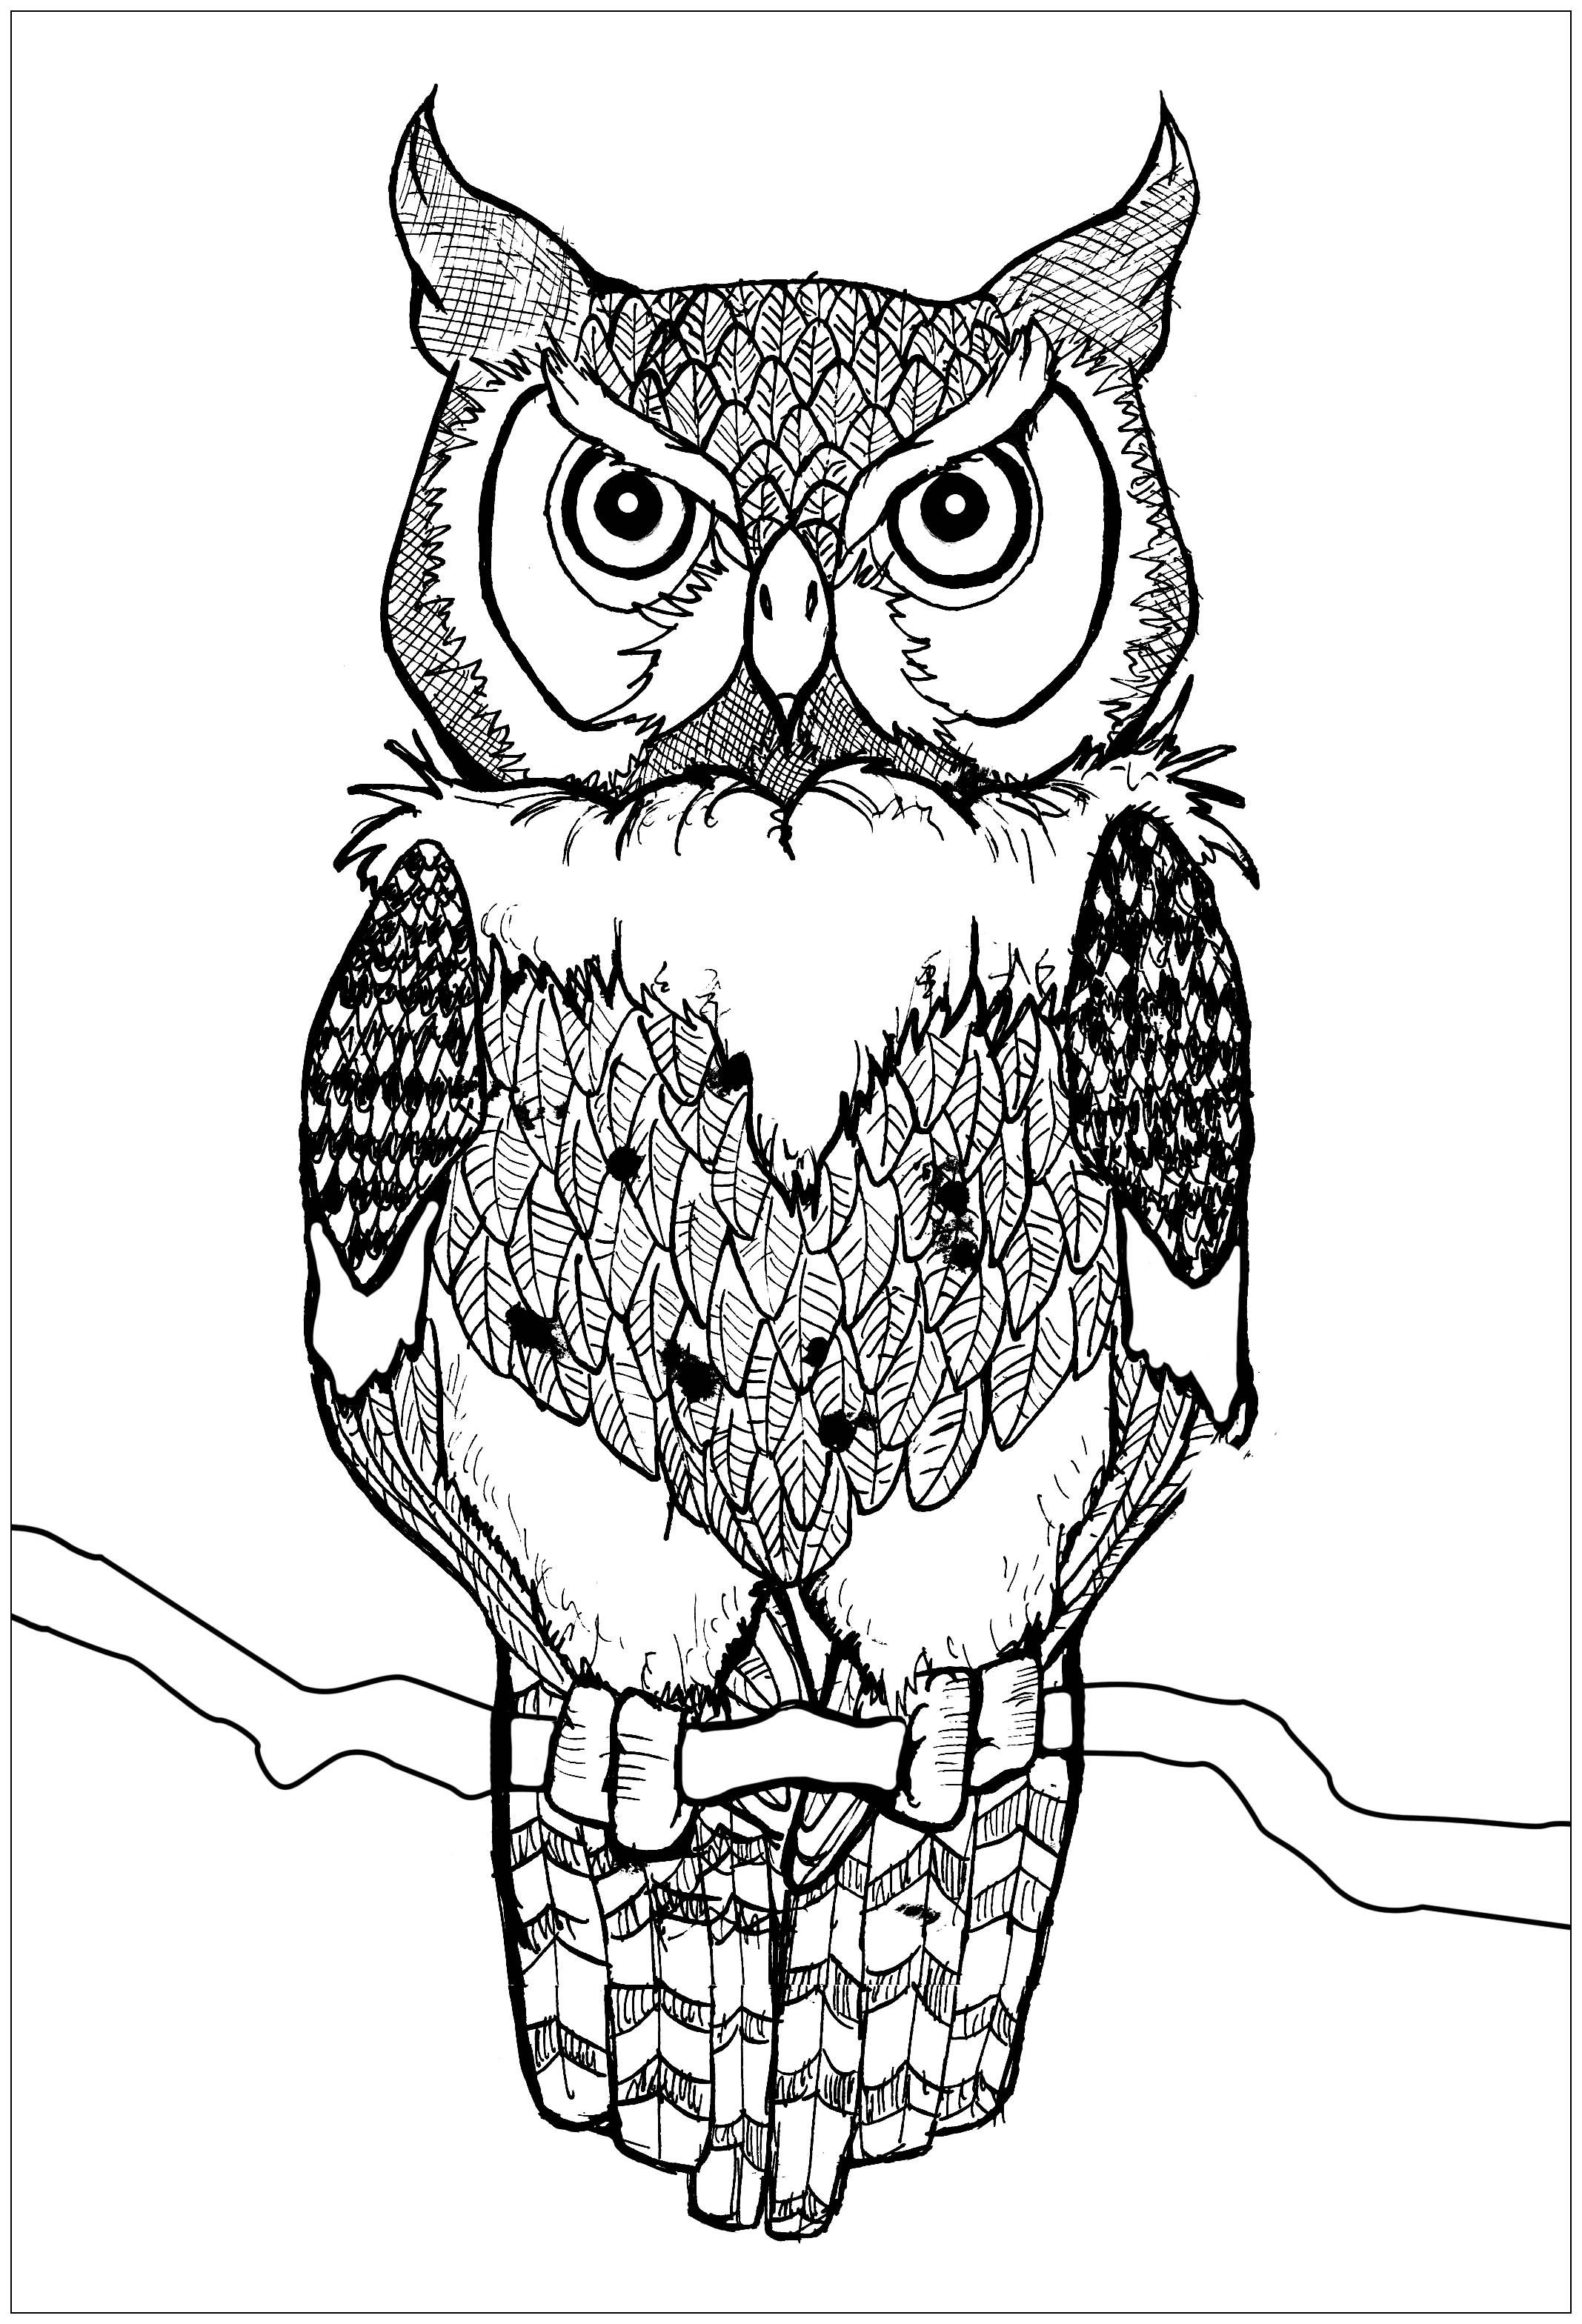 Coloring Pages Of Owls For Kids / Owl coloring page line illustration